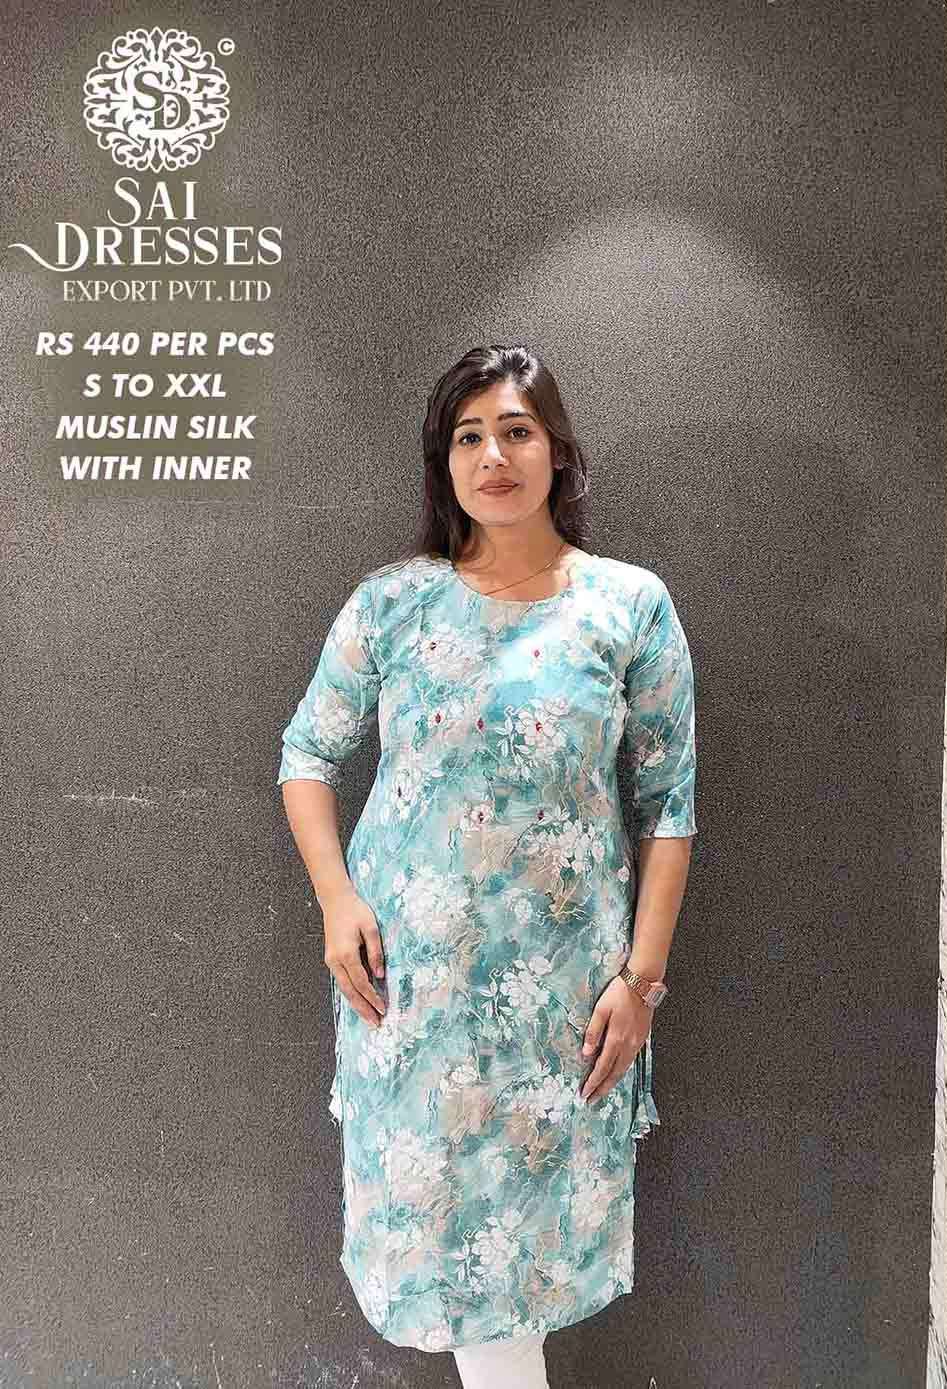 SAI DRESSES PRESENT D.NO SD55 READY TO WEAR DIGITAL PRINTED KURTI COMBO COLLECTION IN WHOLESALE RATE IN SURAT